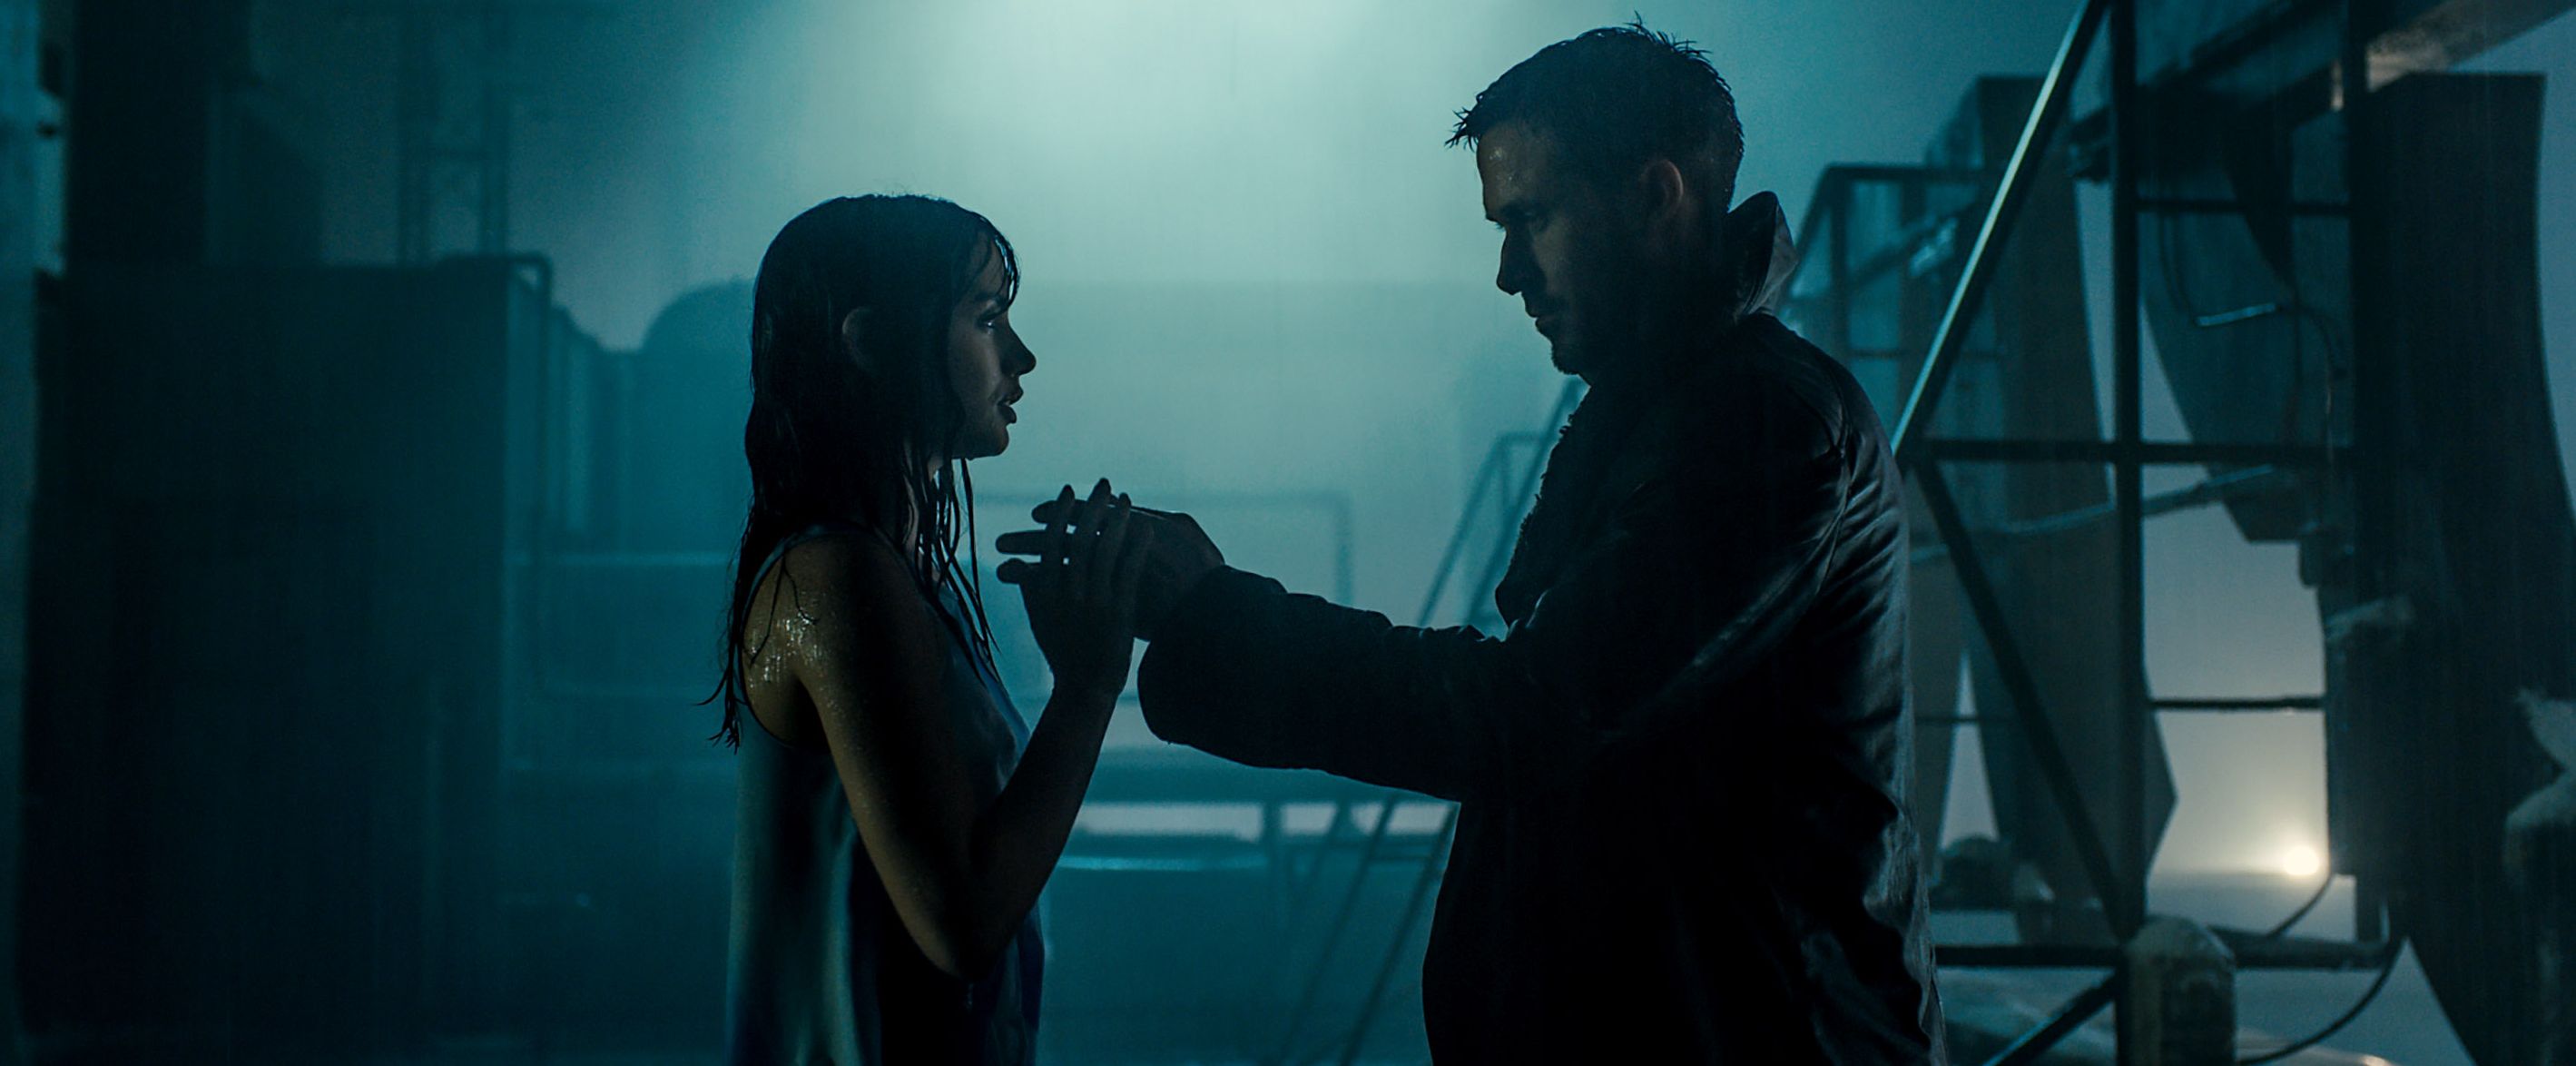 All the right feels - &#039;Blade Runner 2049&#039; (Ana De Armas and 